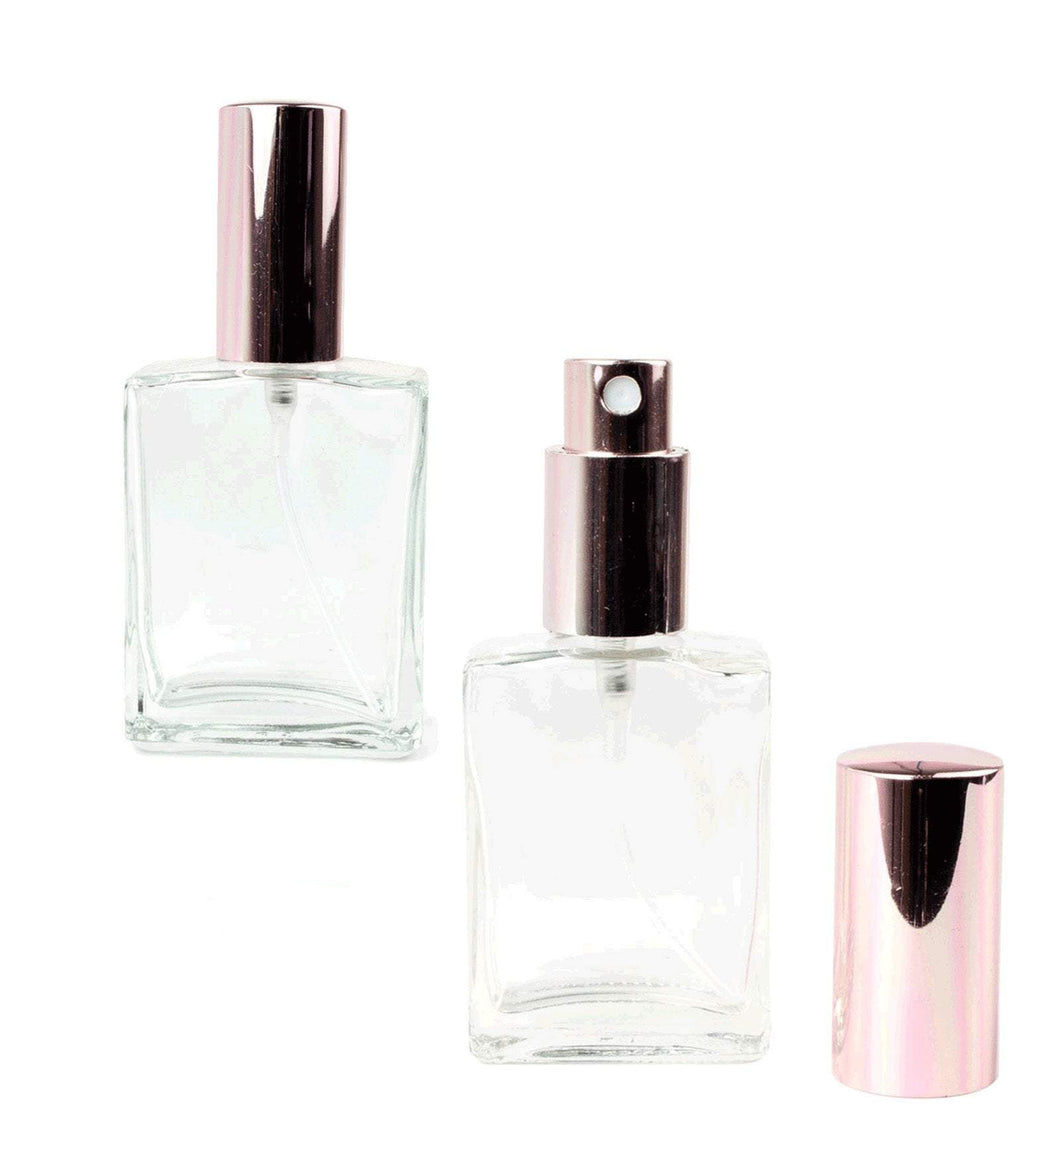 1 ROSE GOLD Perfume ATOMIZER Clear Glass 30ml or 60ml 1 or 2 Oz Rectangle Spray Bottle